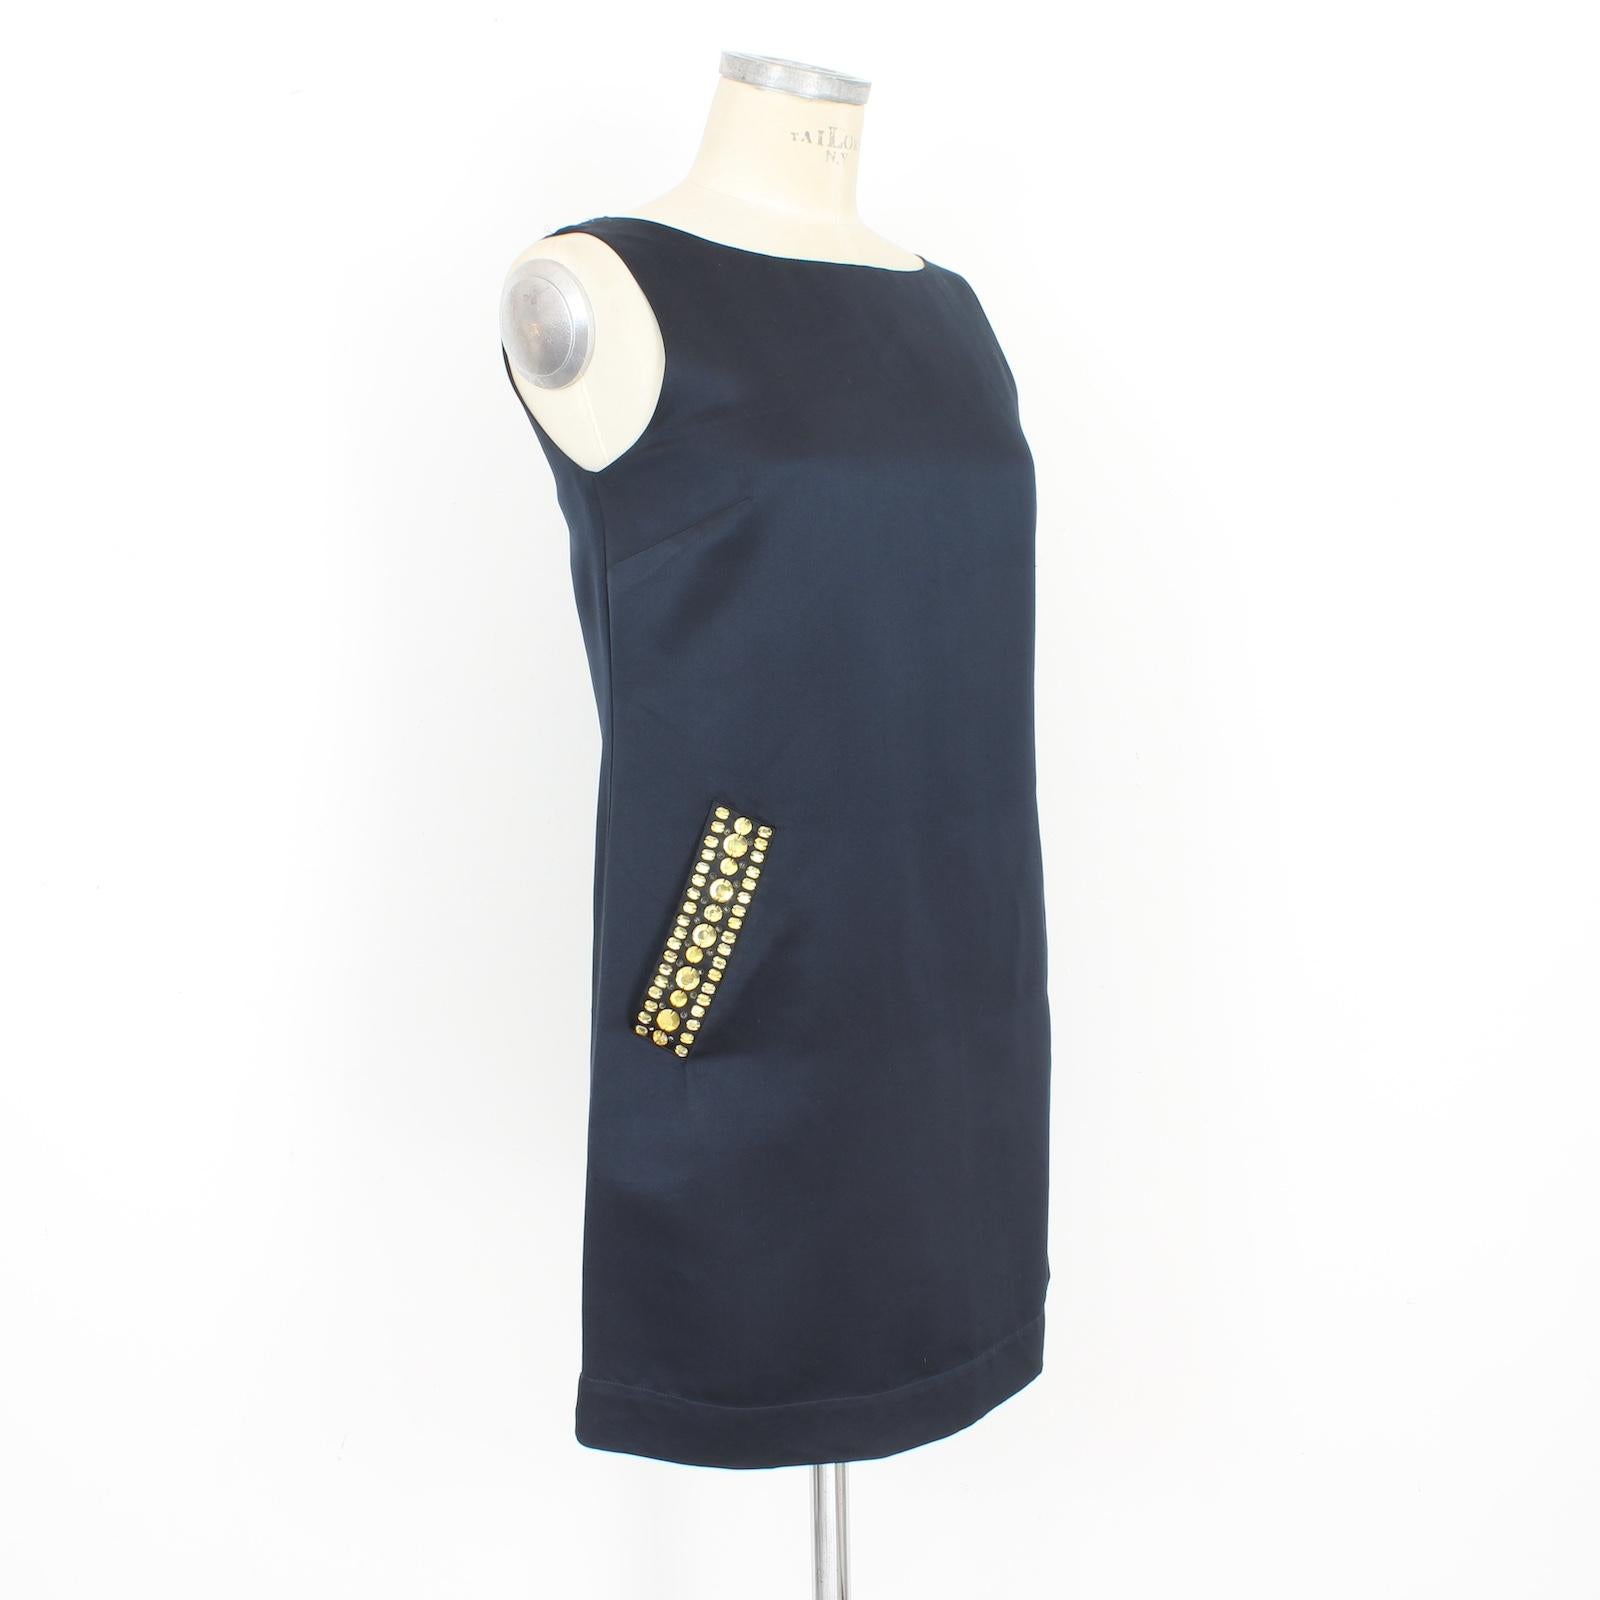 Valentino red evening dress 2000s. Sheath black dress, sleeveless, crew neck, special pockets covered with yellow rhinestones. 100% silk fabric, internally lined. There are some small pulled threads.

Size: 40 It 6 Us 8 Uk

Shoulder: